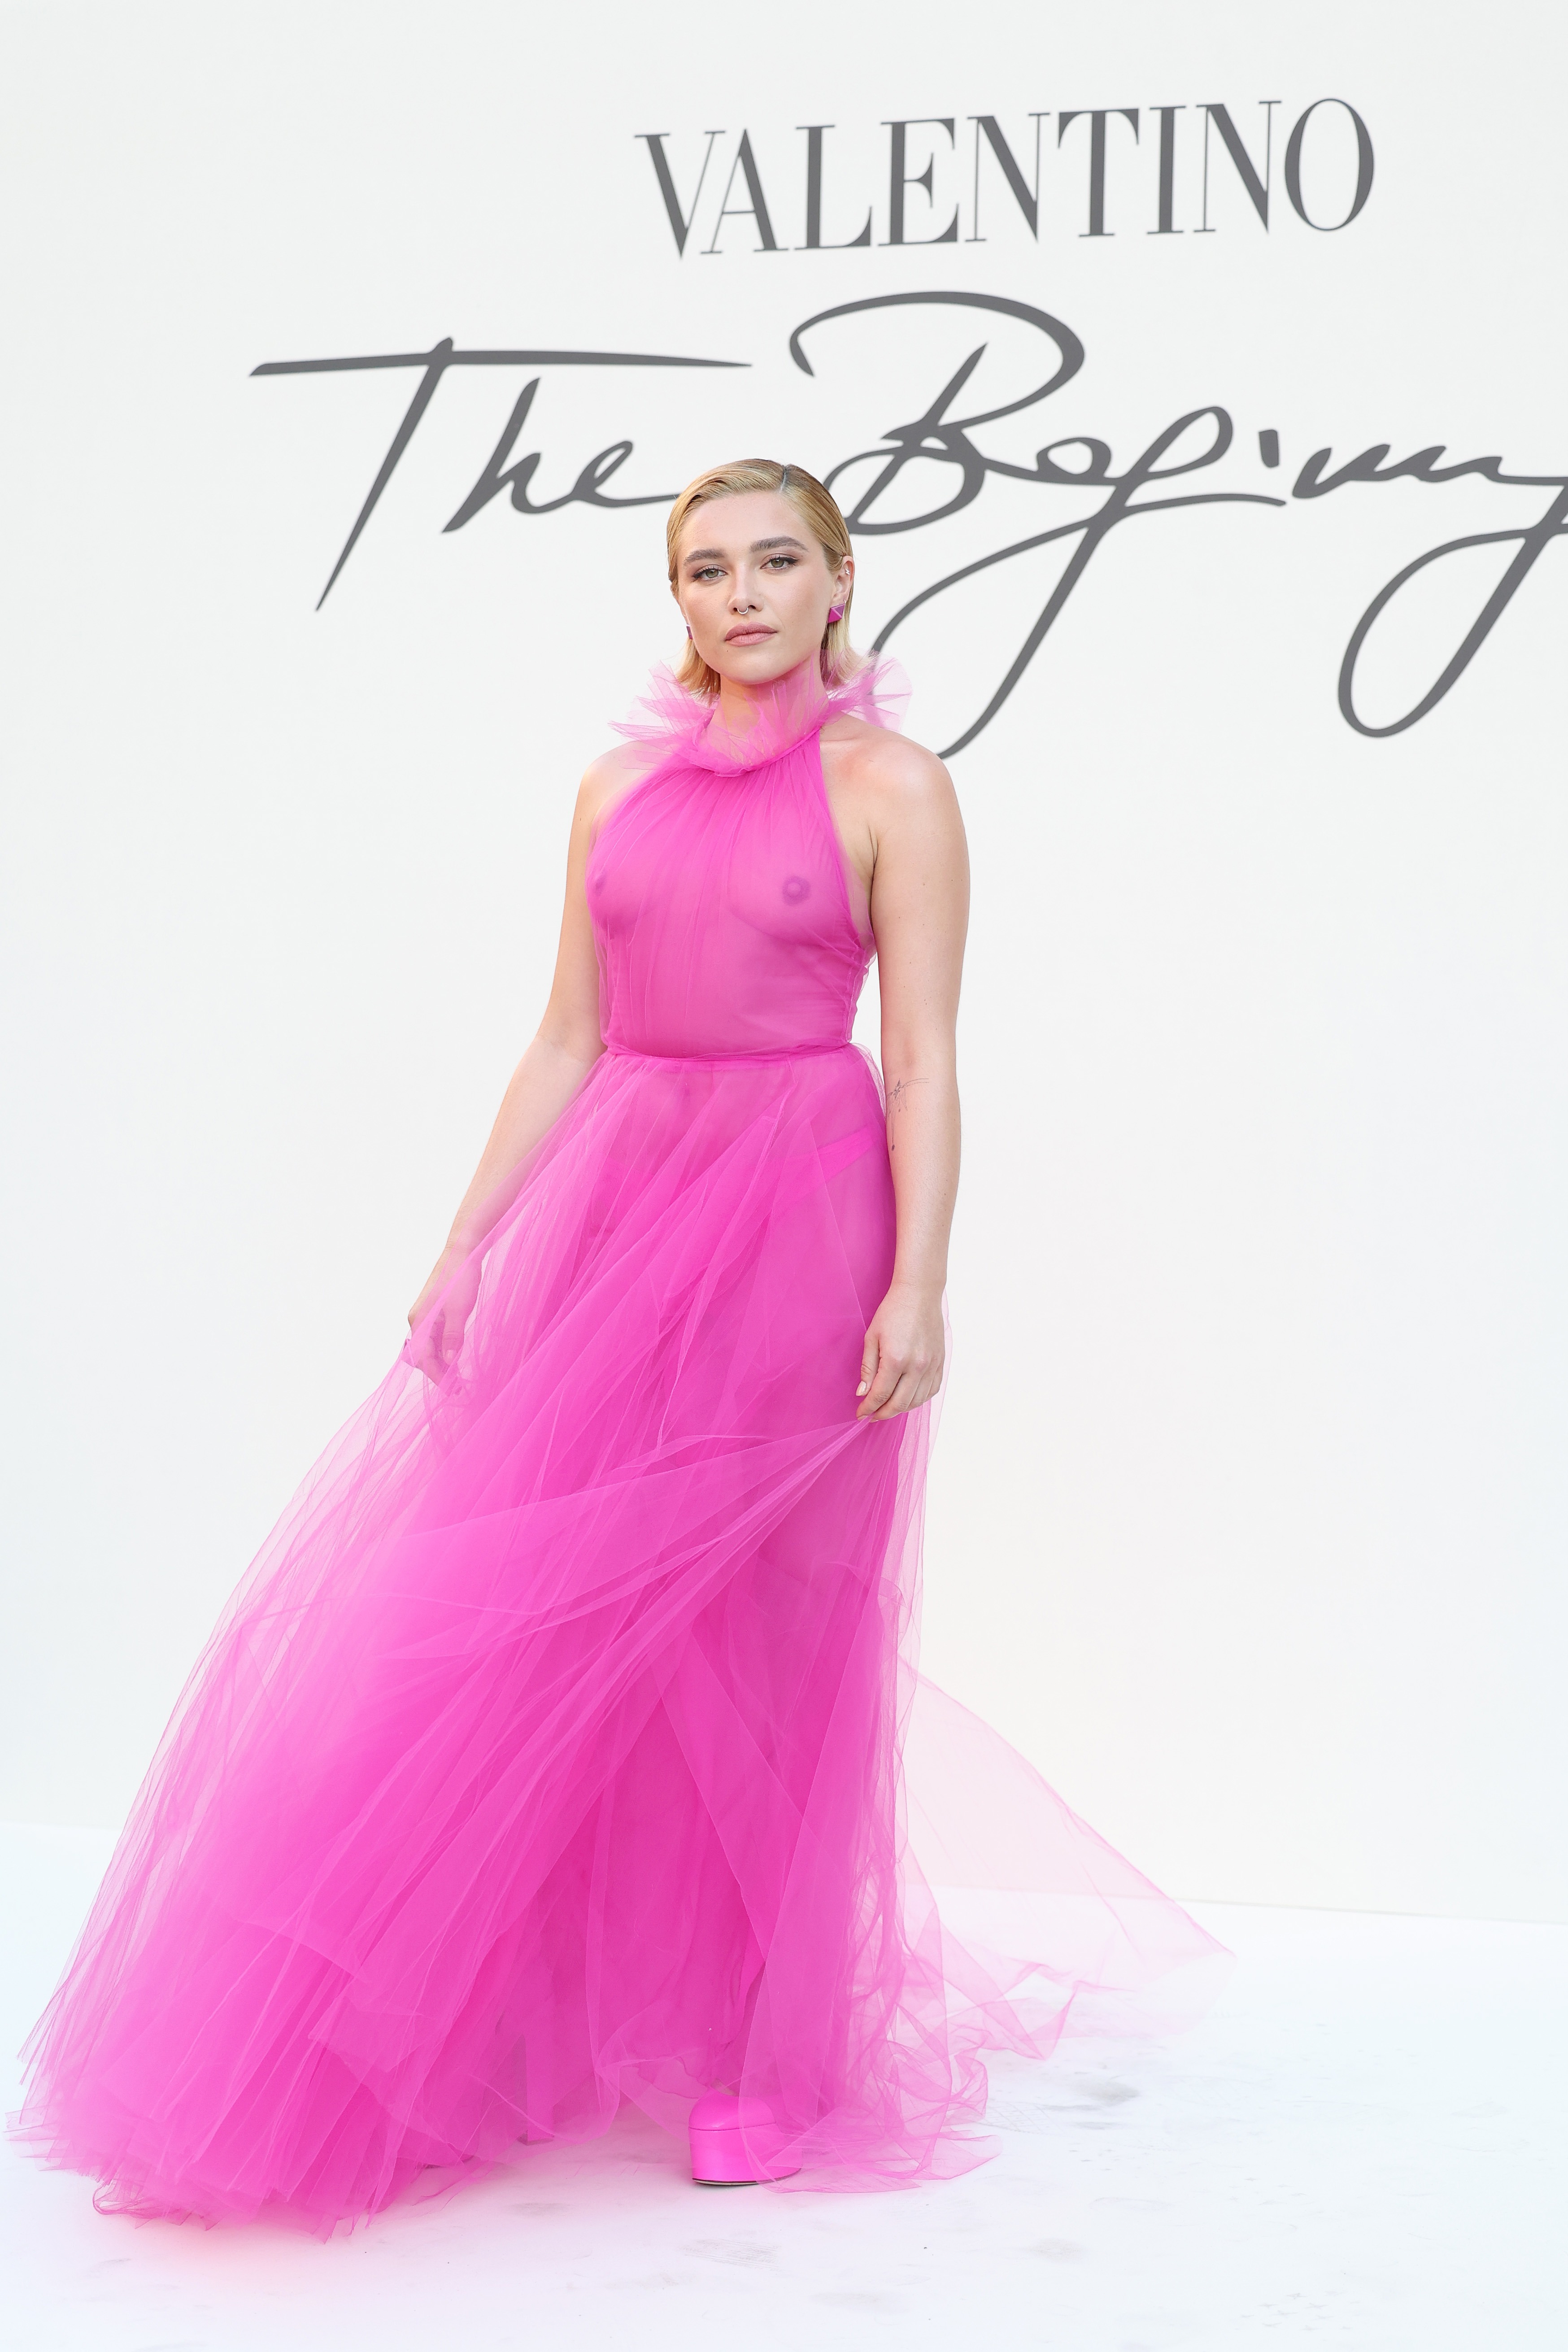 Florence Pugh and the Playful Spirit on the Red Carpet